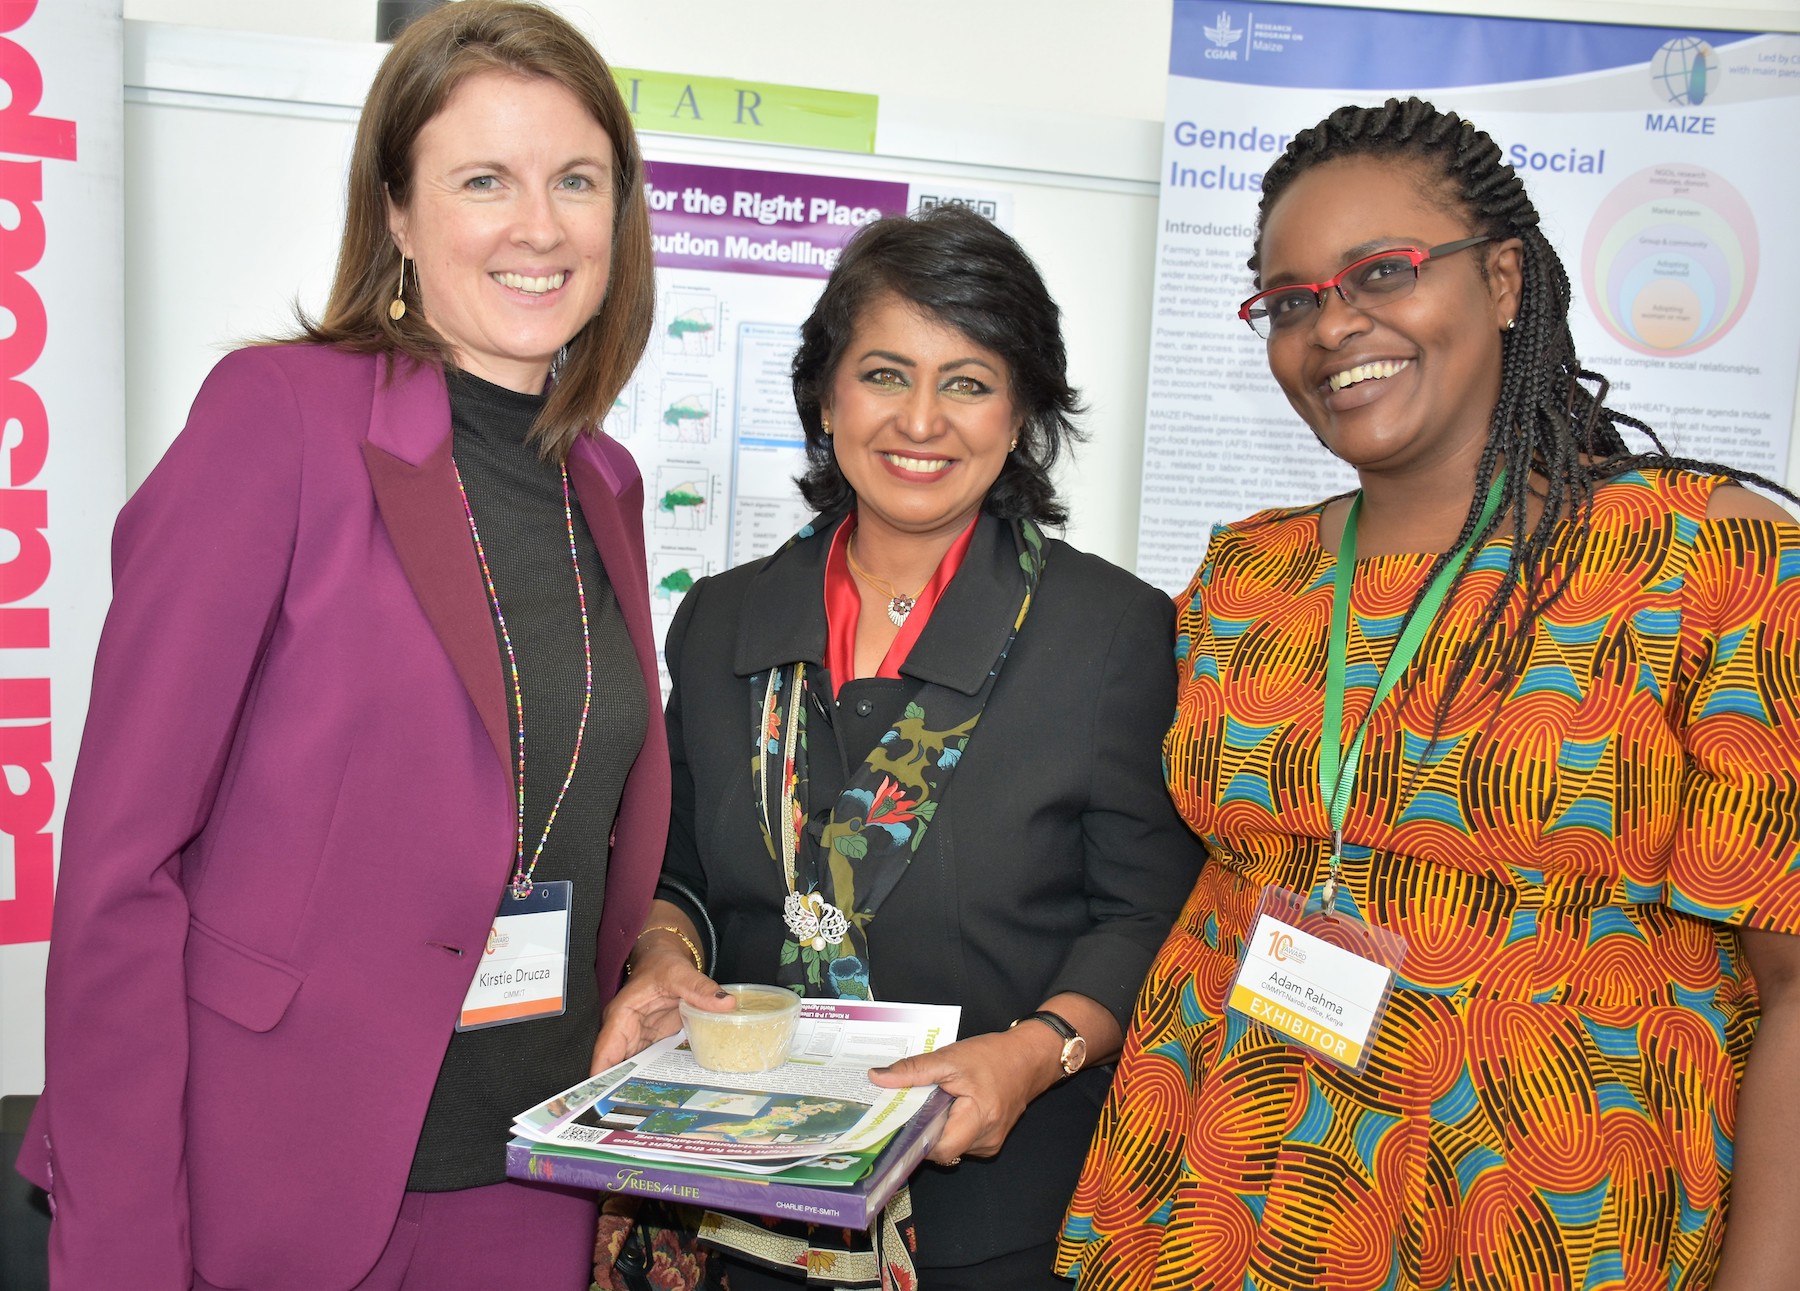 Kristie Drucza (left) and Rahma Adam (right) had a chance to share CIMMYT’s gender work with the former president of Mauritius, Ameenah Gurib-Fakim, at AWARD’s tenth anniversary event in Nairobi. (Photo: Joshua Masinde/CIMMYT)